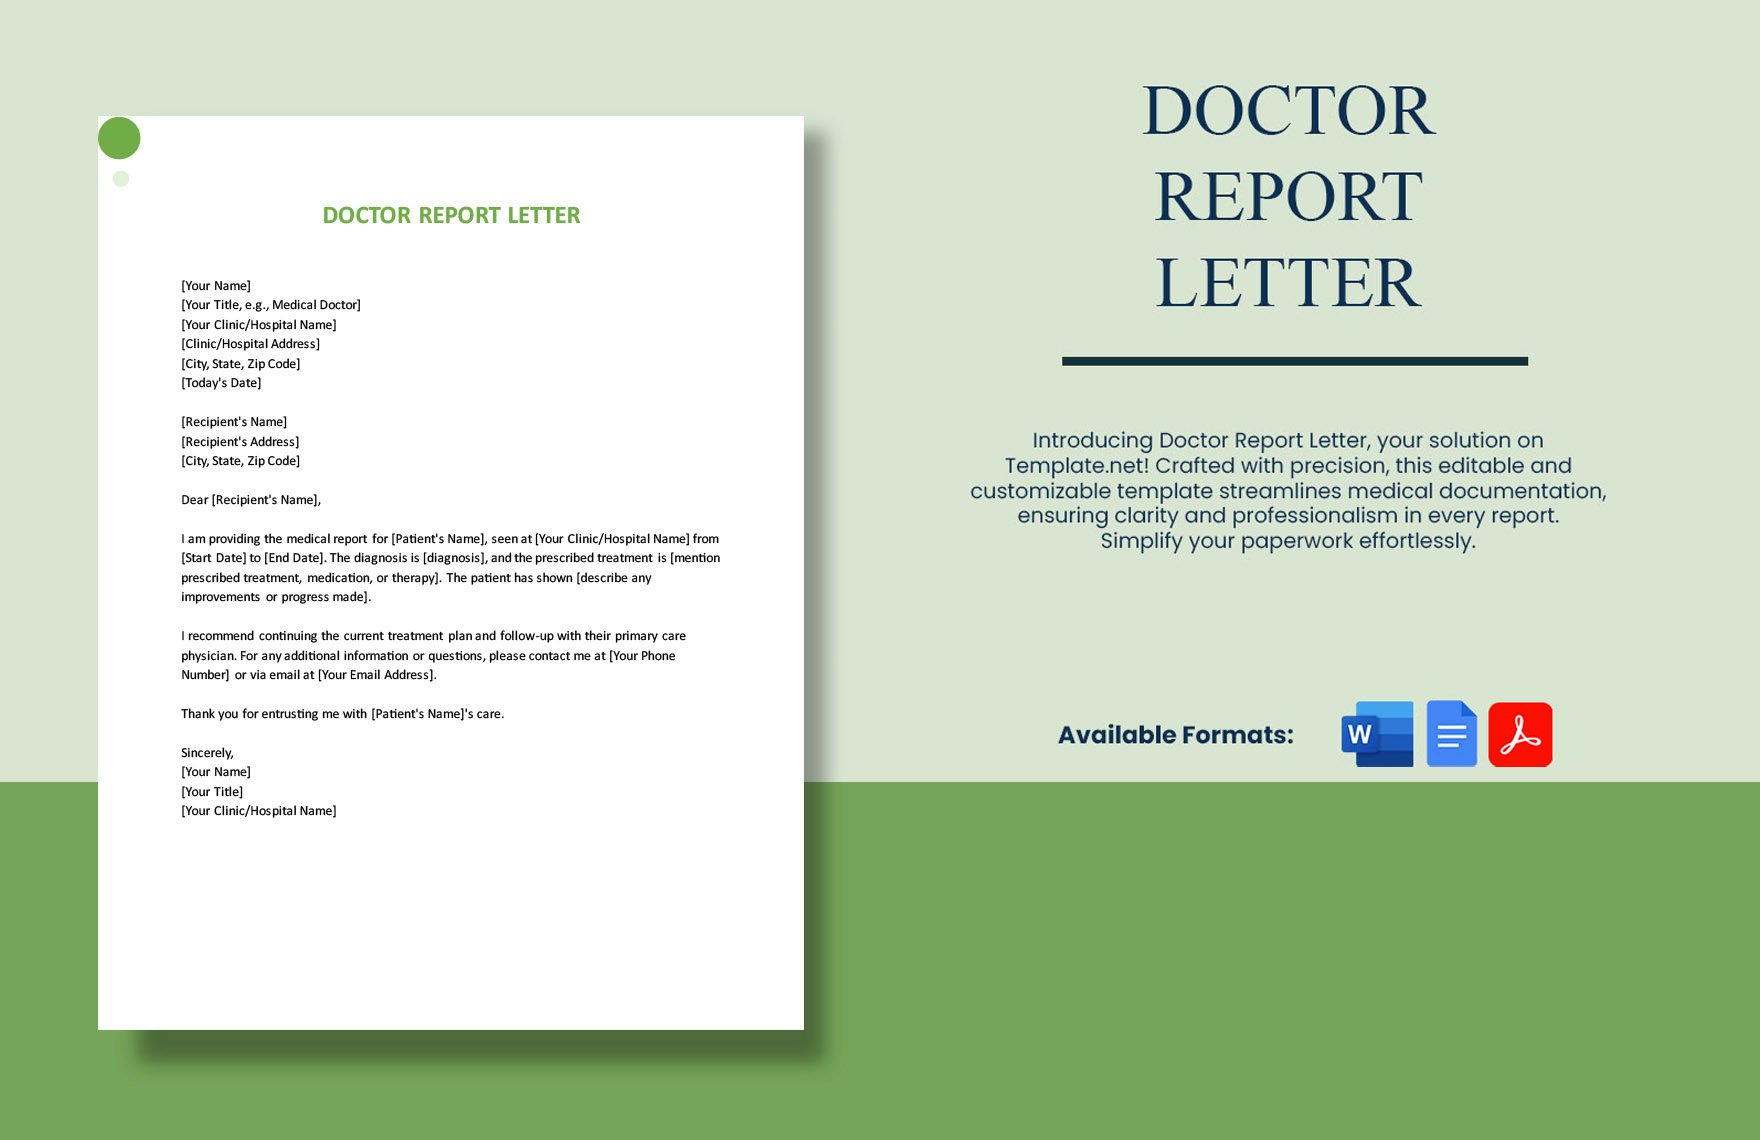 Doctor Report Letter in Word, Google Docs, PDF